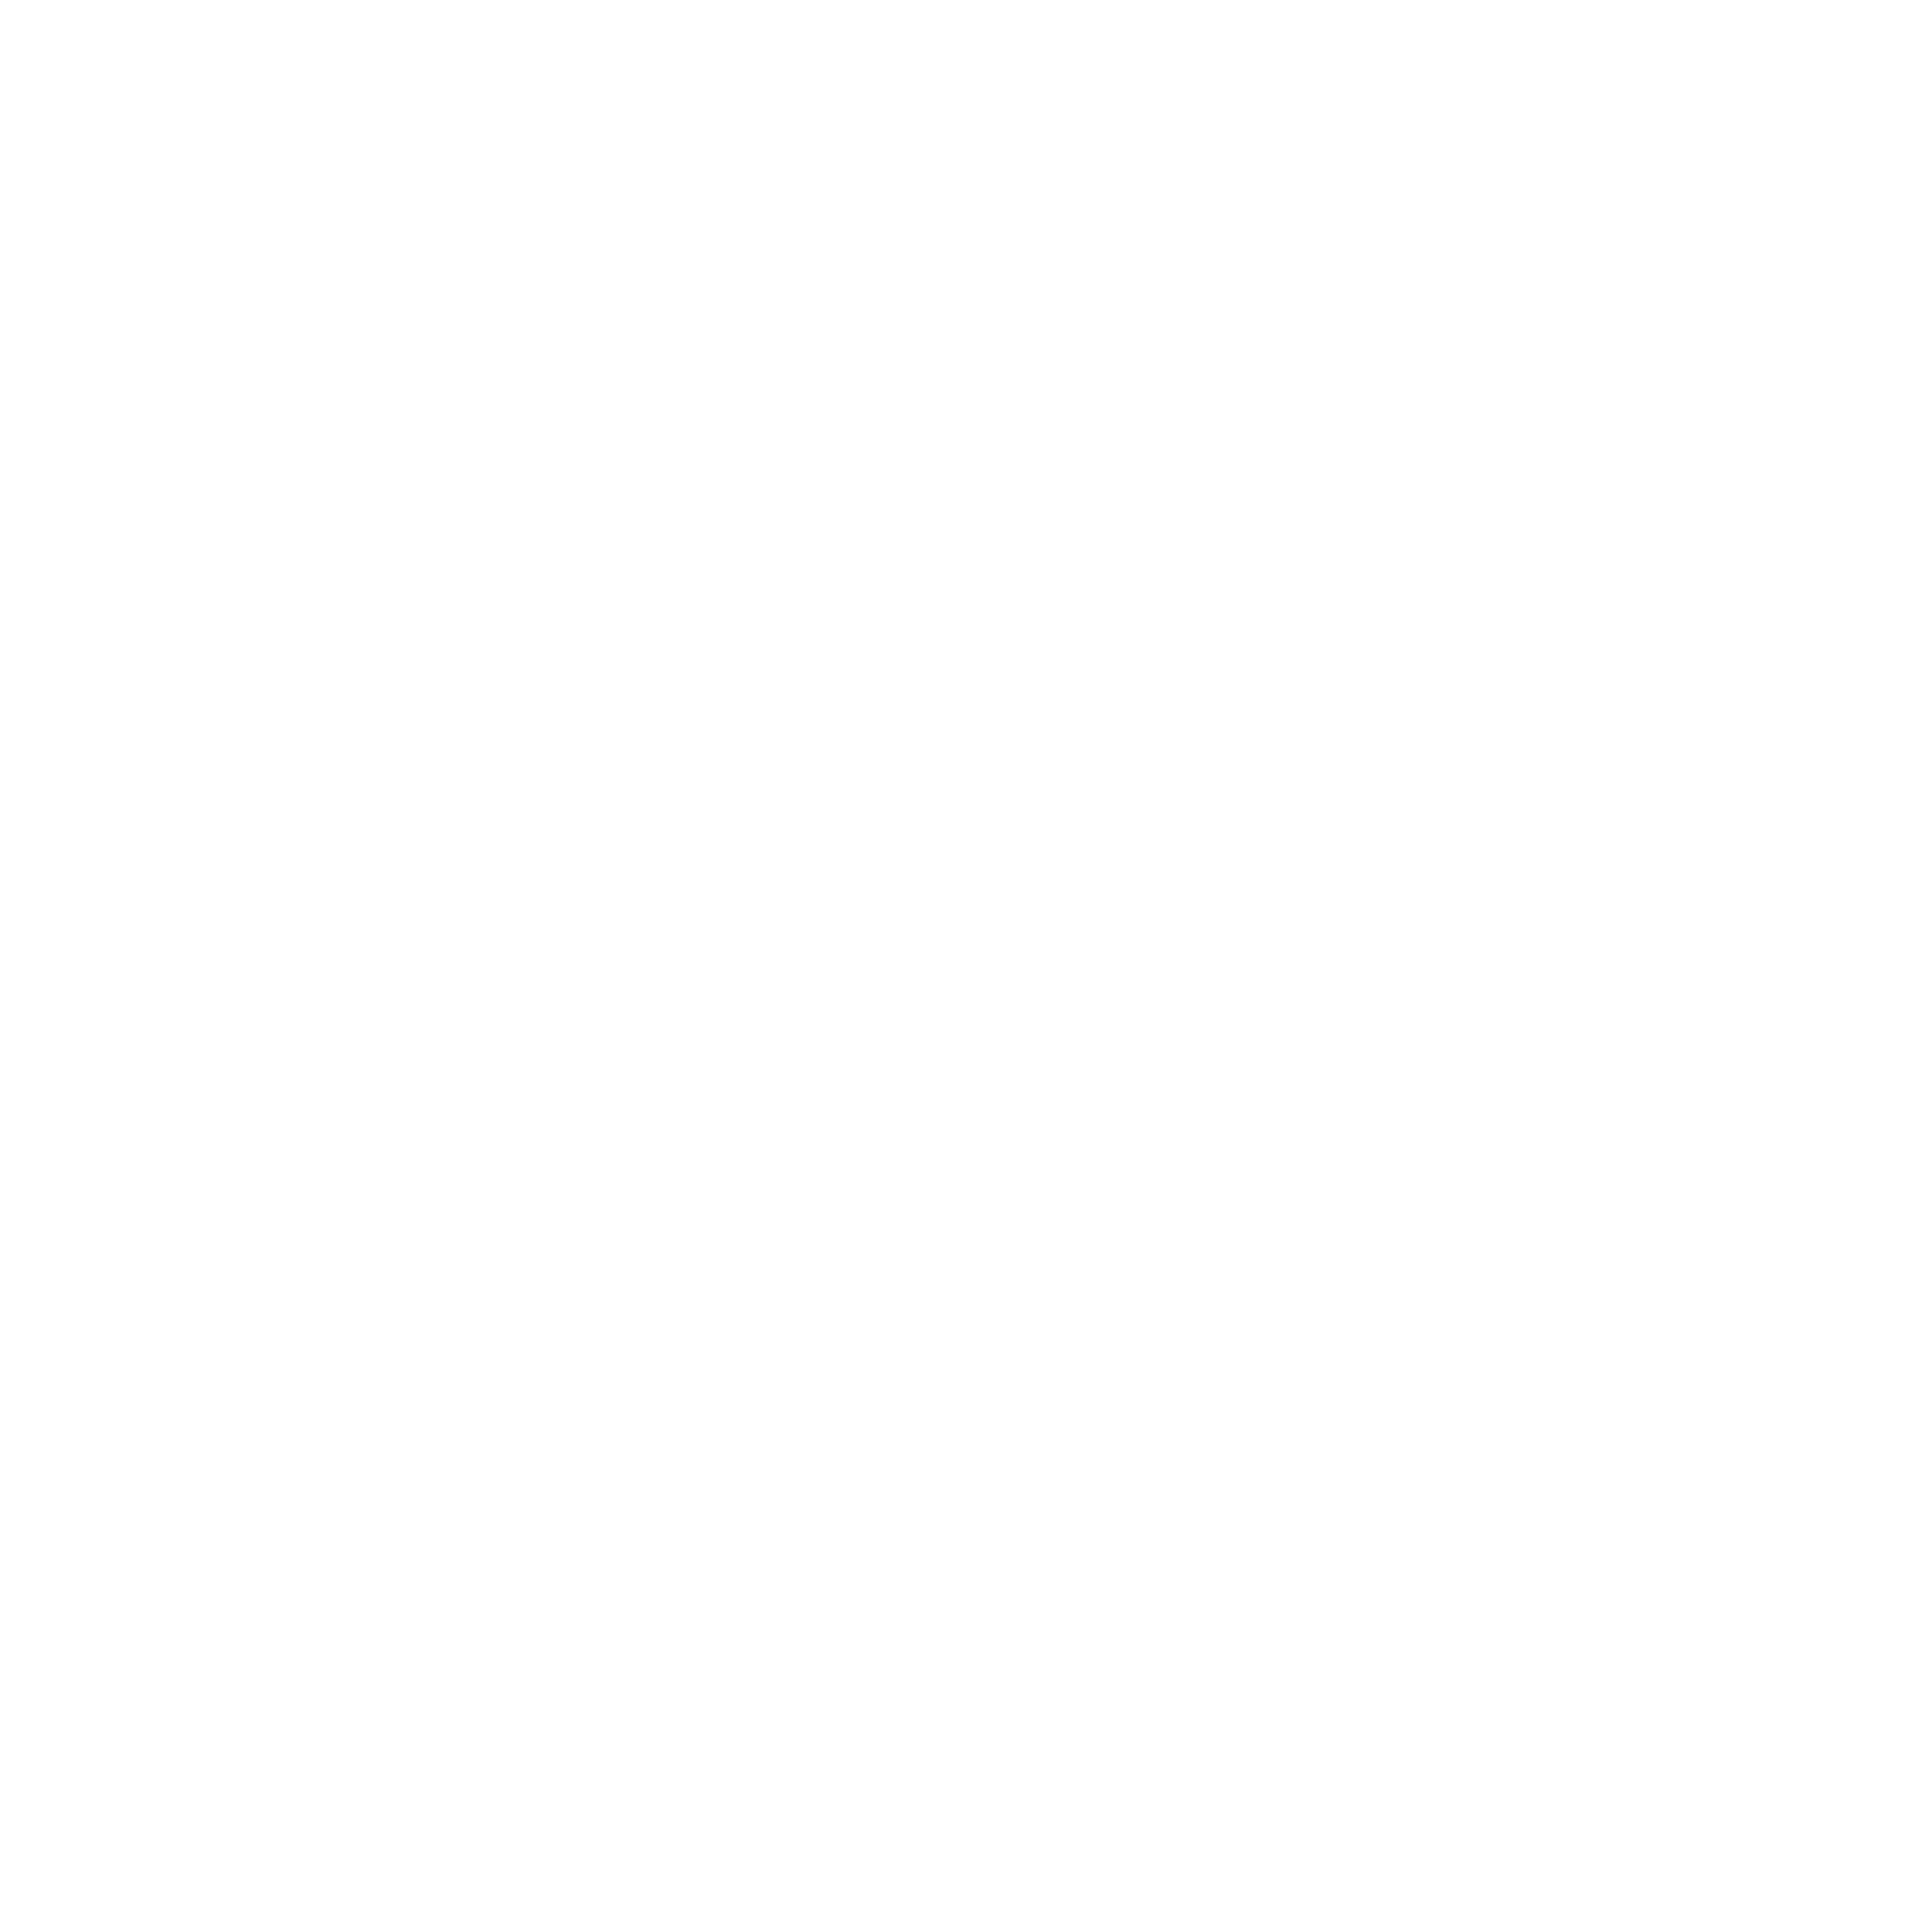 the get connected logo